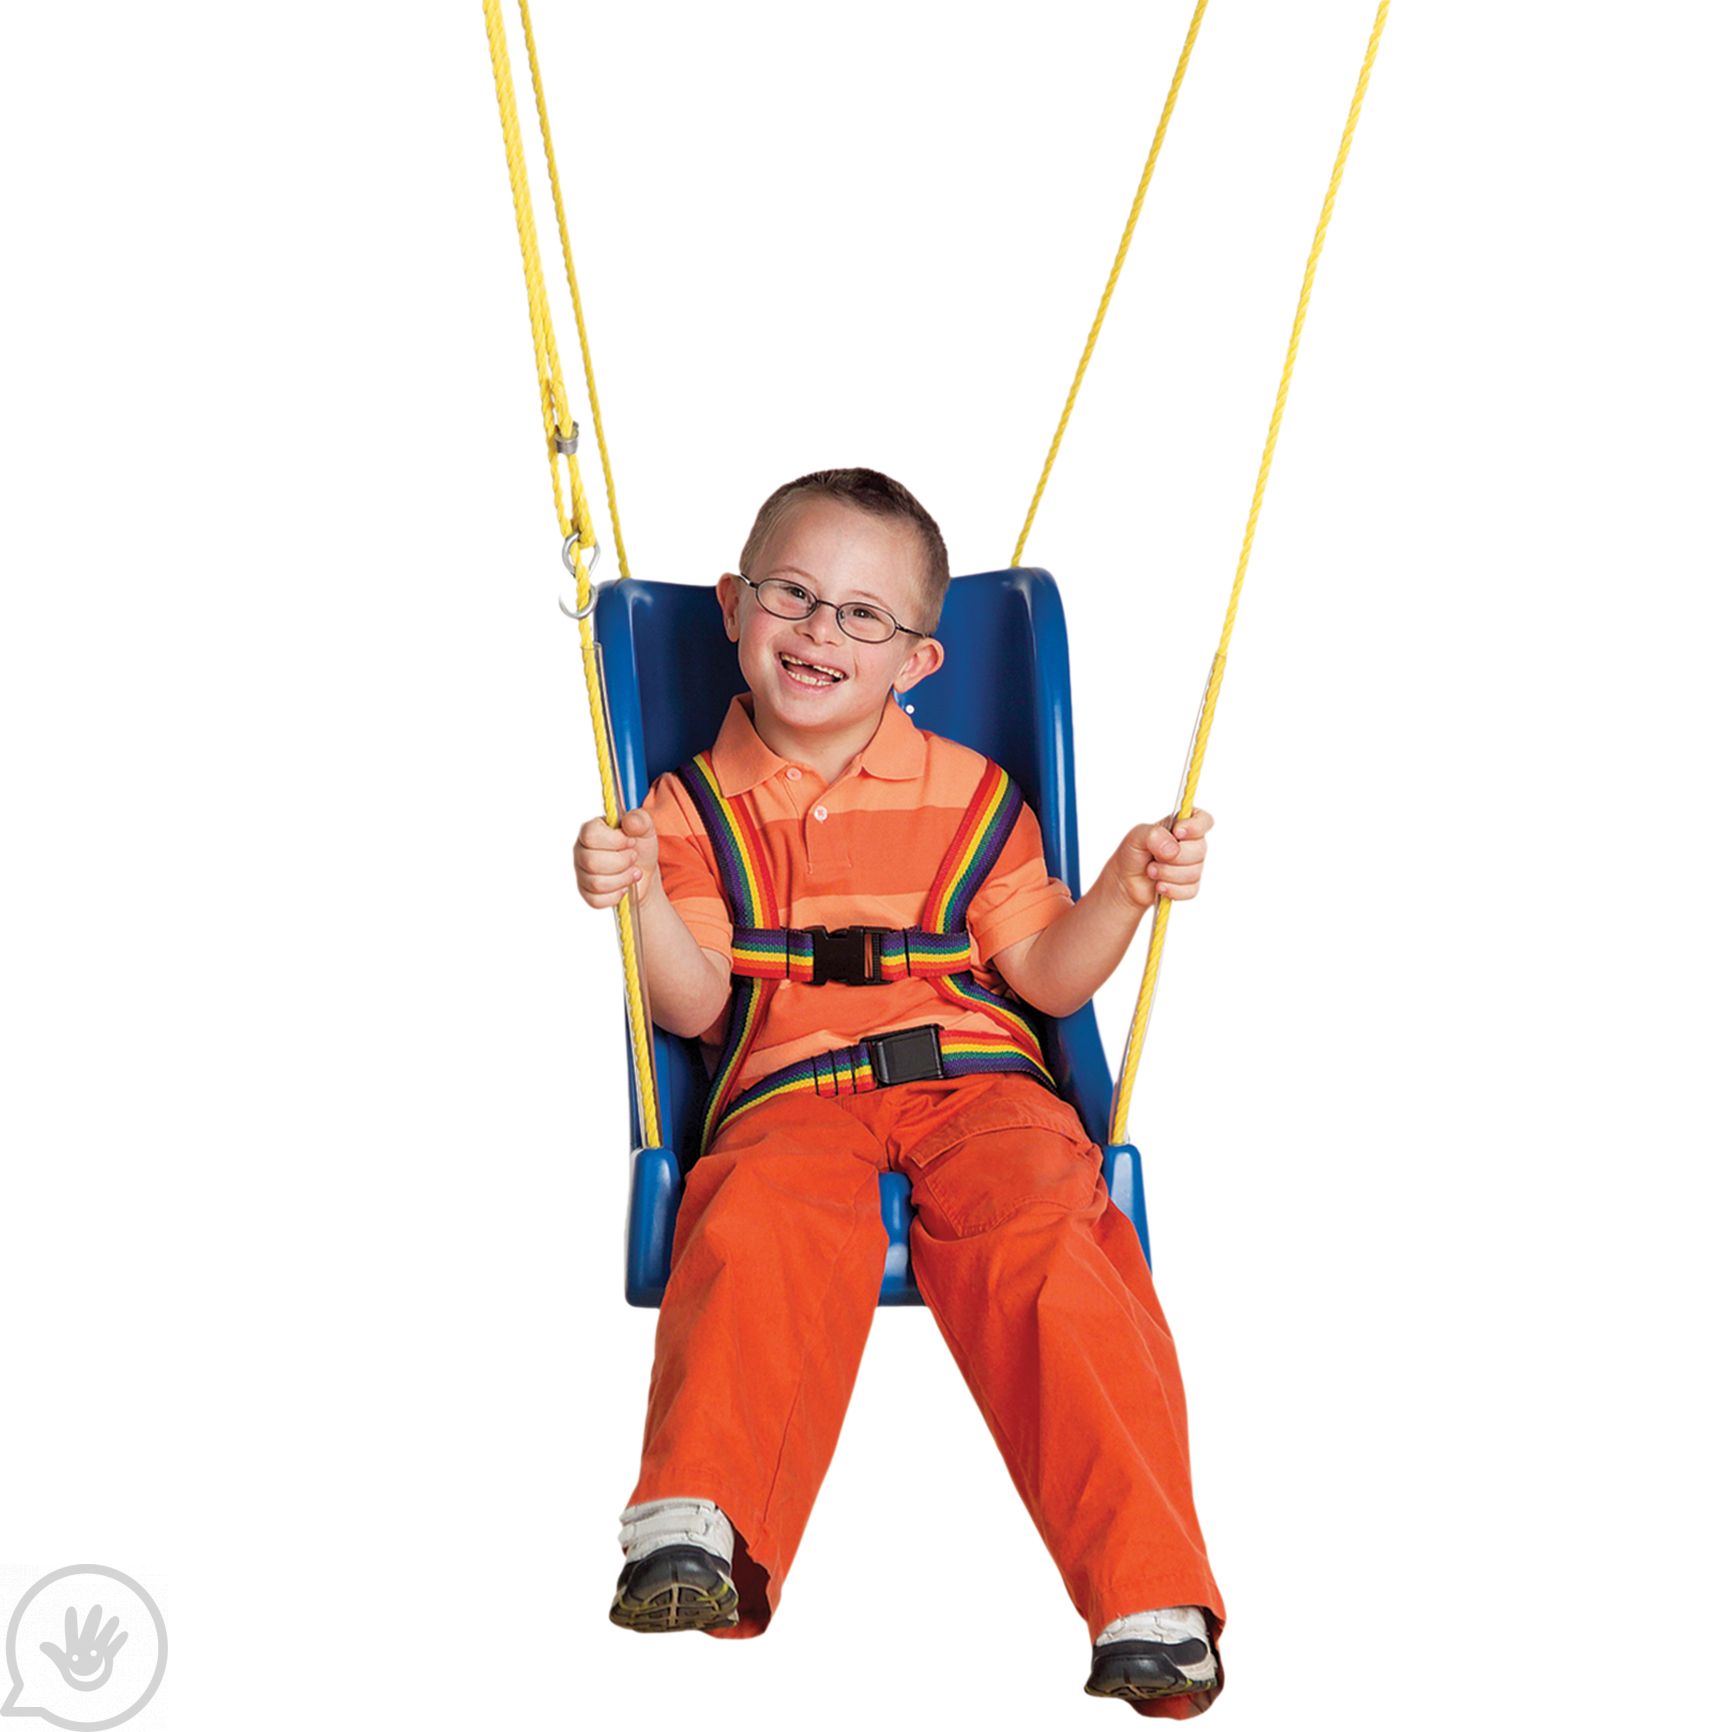 Plastic Swing Seat with Rope Children Outdoor Play 